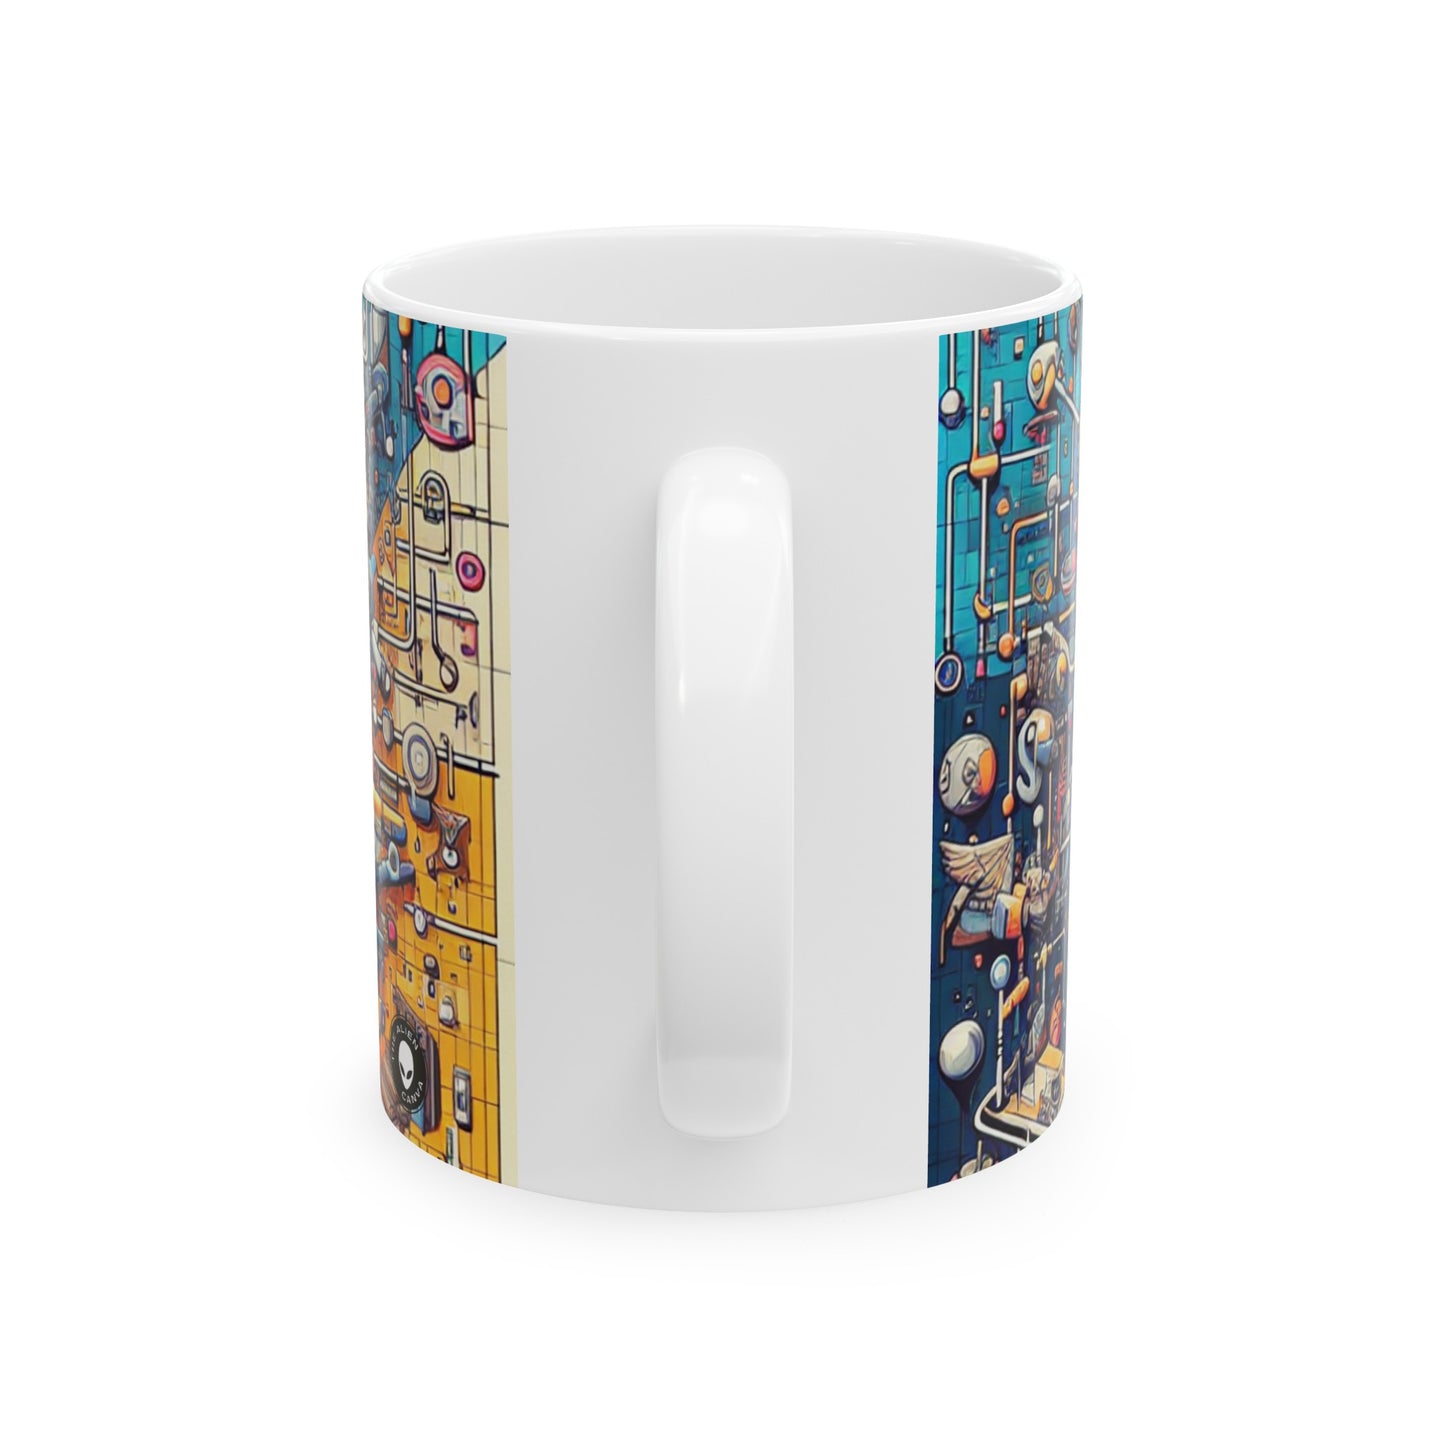 "Connection Points: Exploring Human Interactions in Public Spaces" - The Alien Ceramic Mug 11oz Relational Art